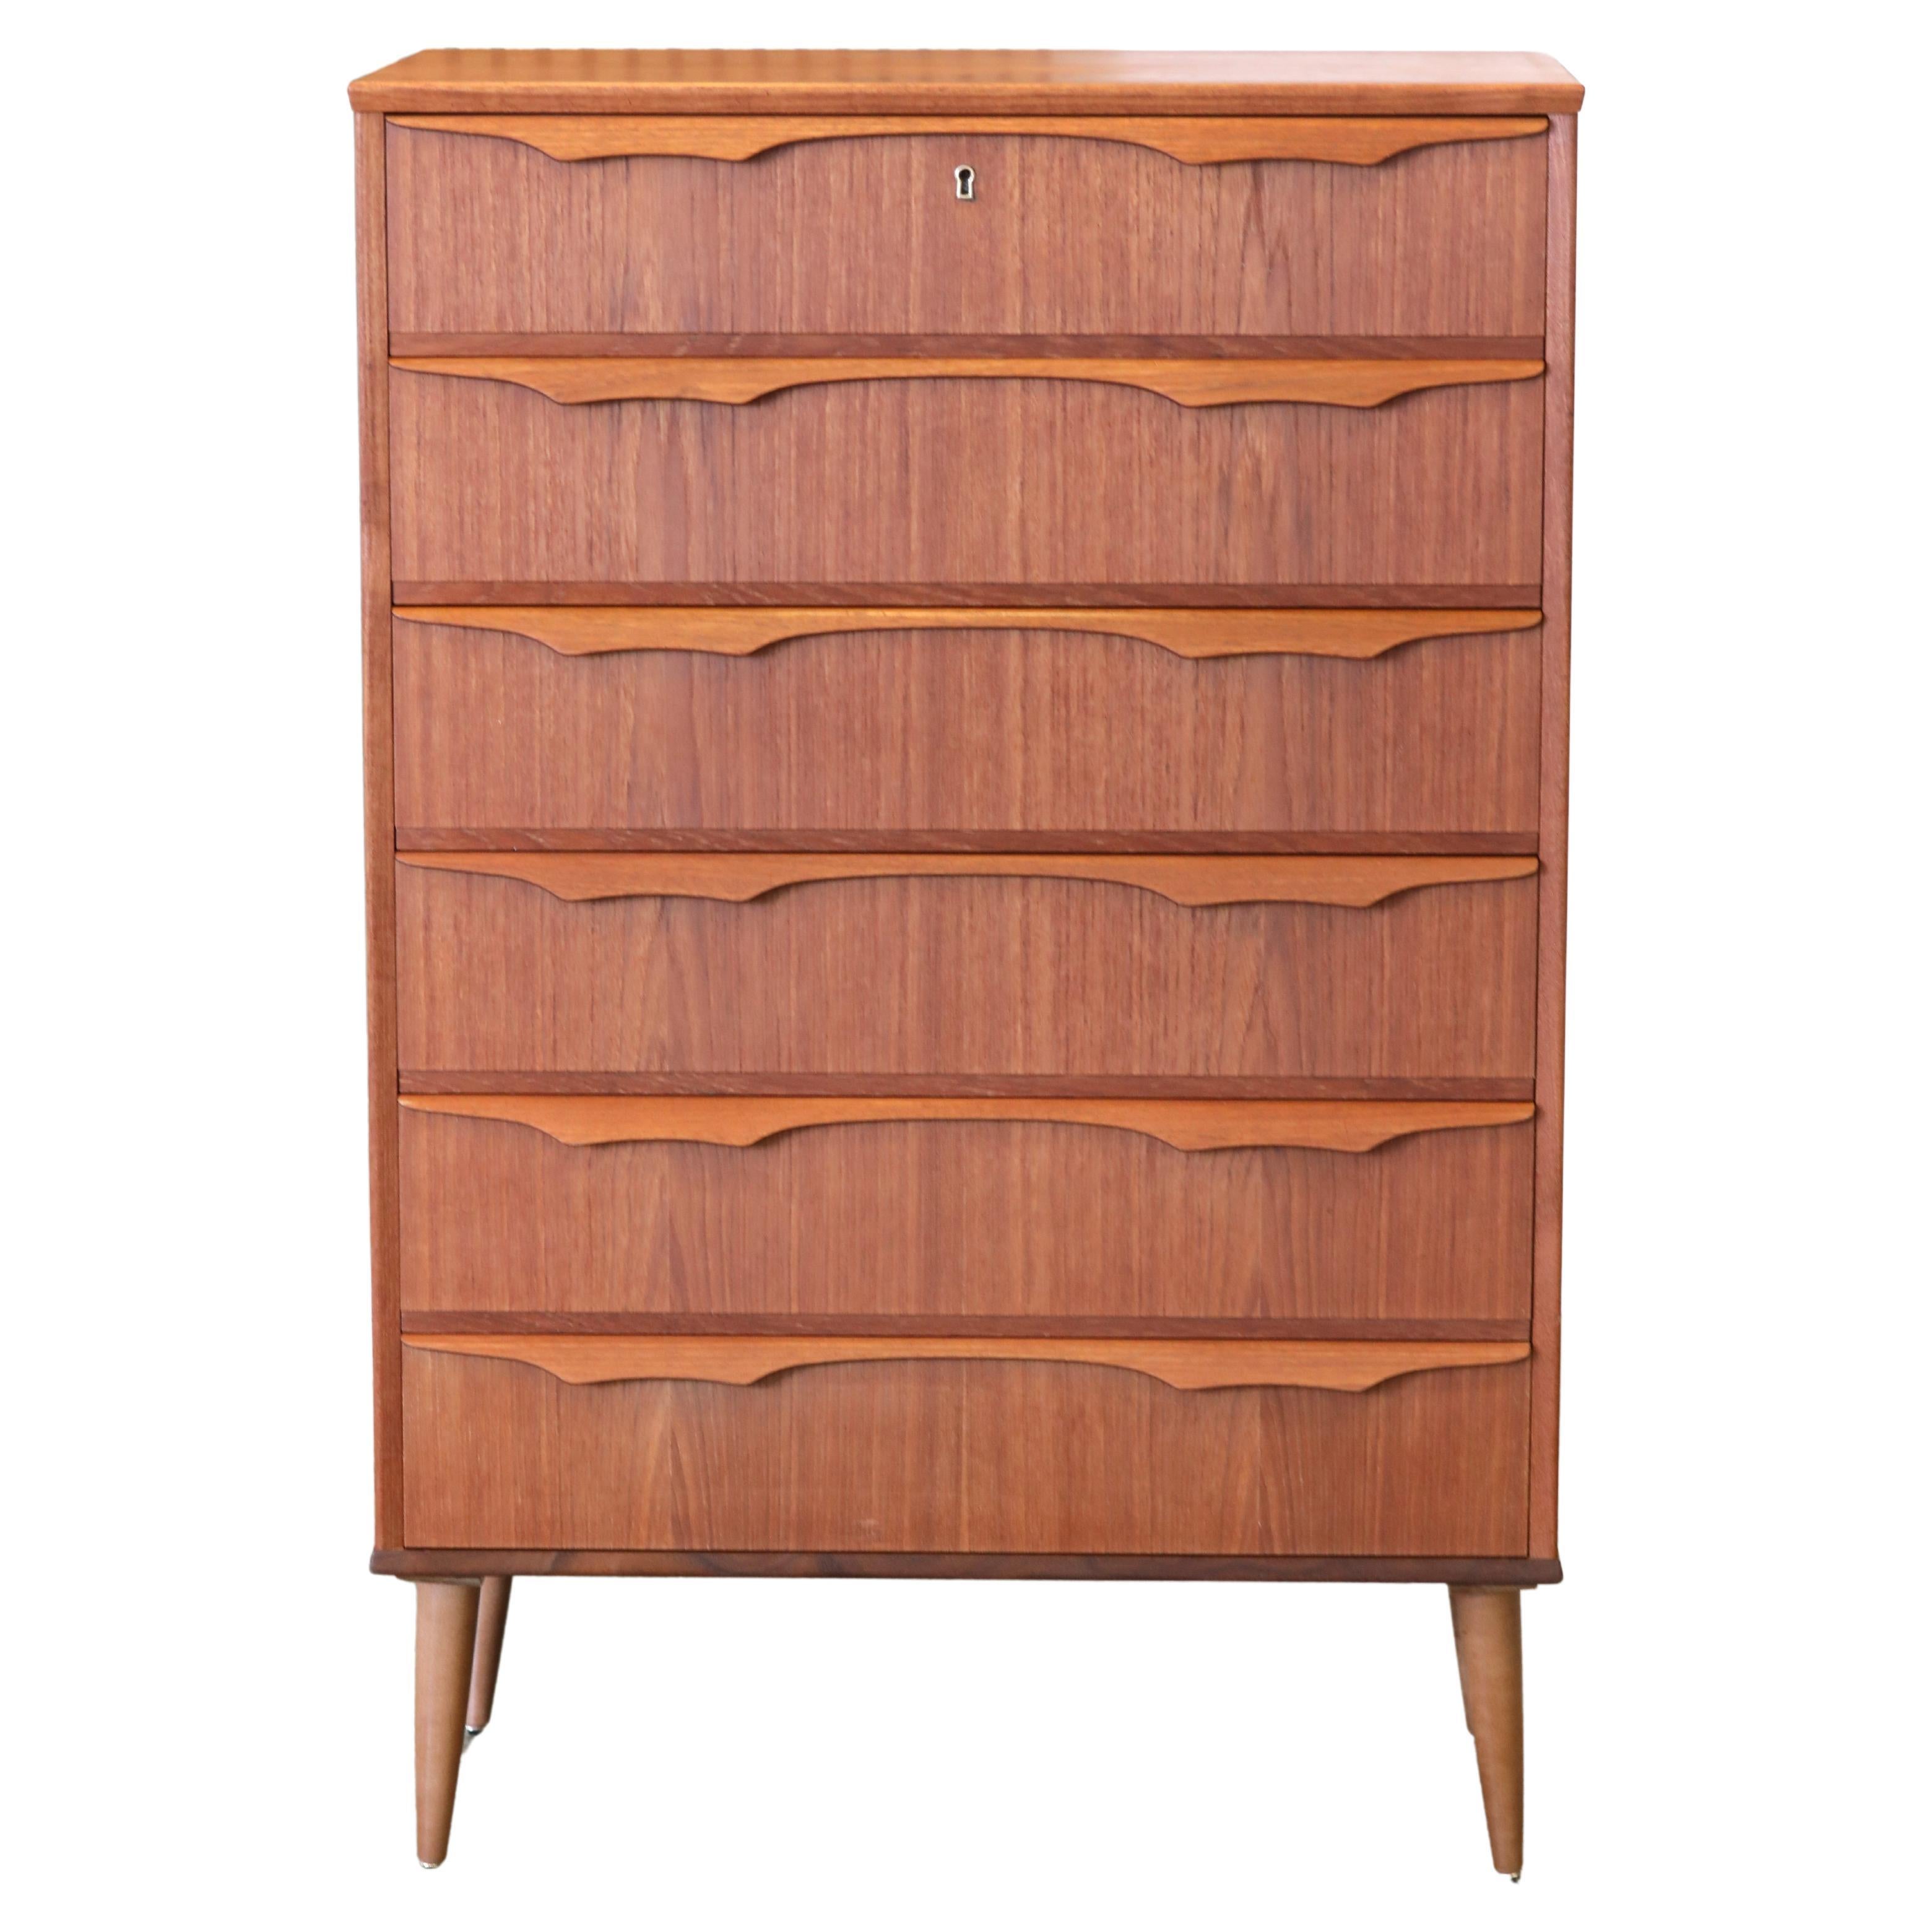  Trekanten Denmark chest of drawers in teak with six drawers 60s